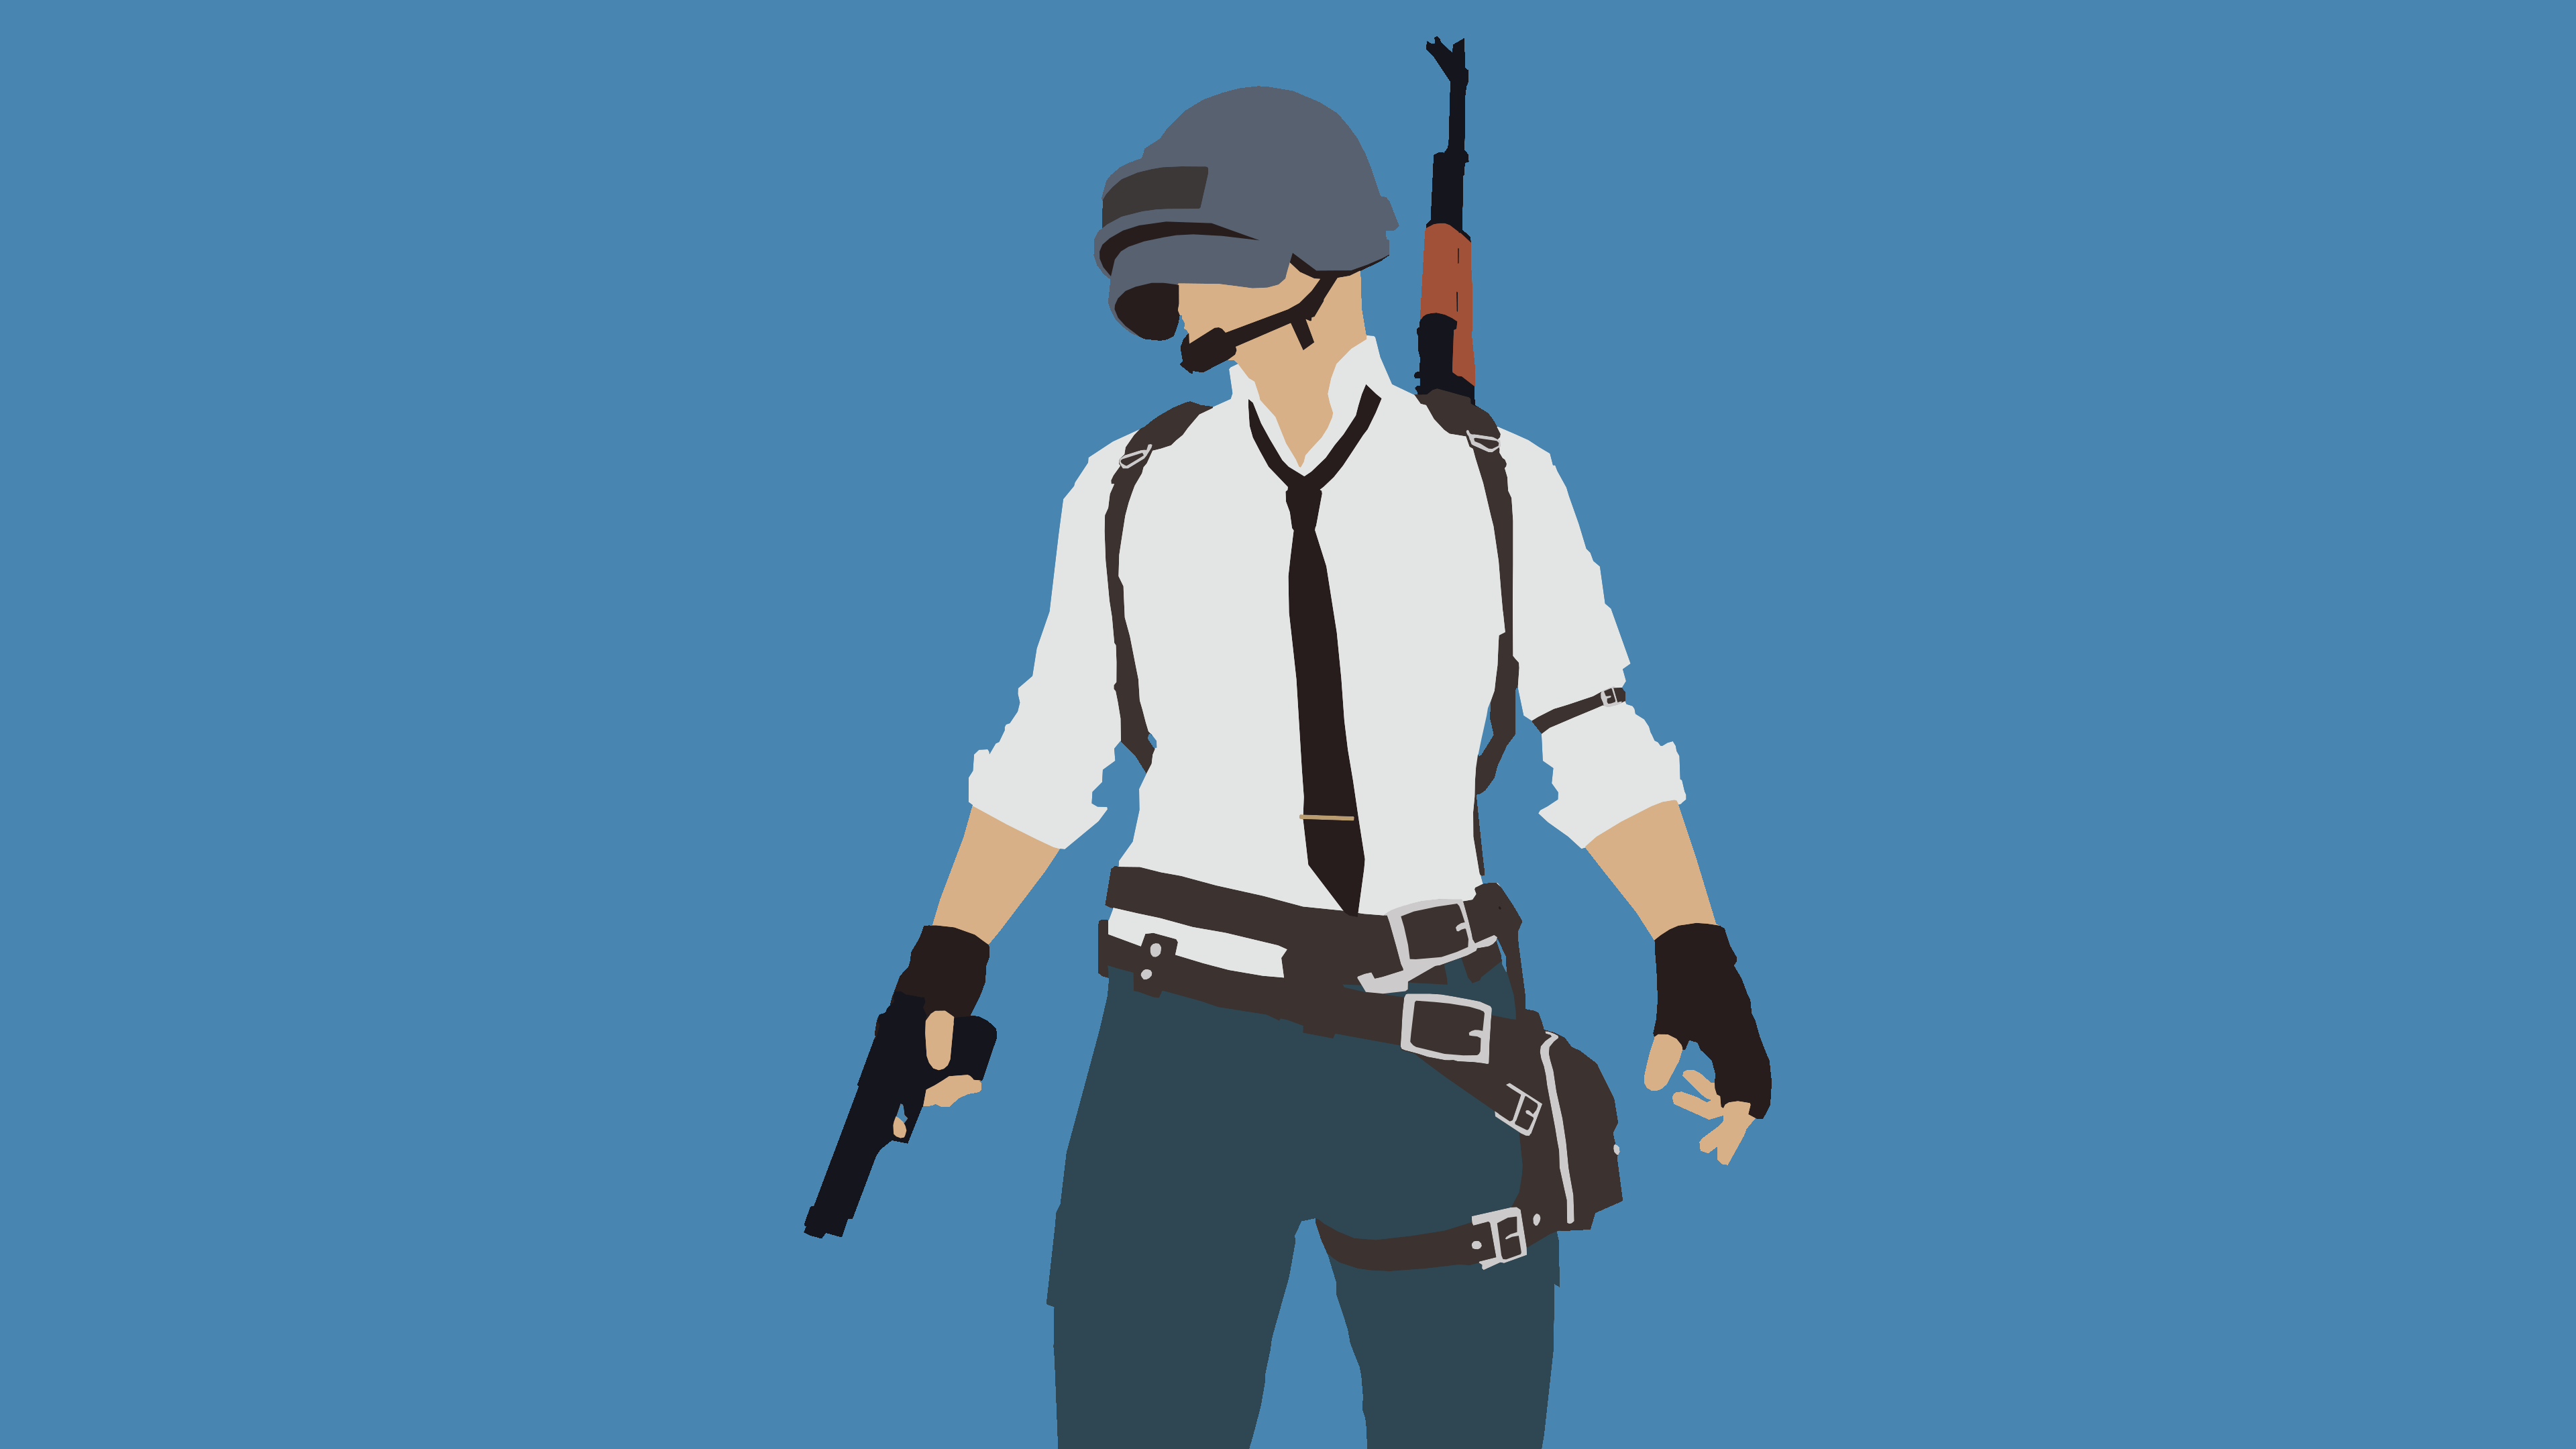 I Made Some Minimal PUBG Wallpapers!